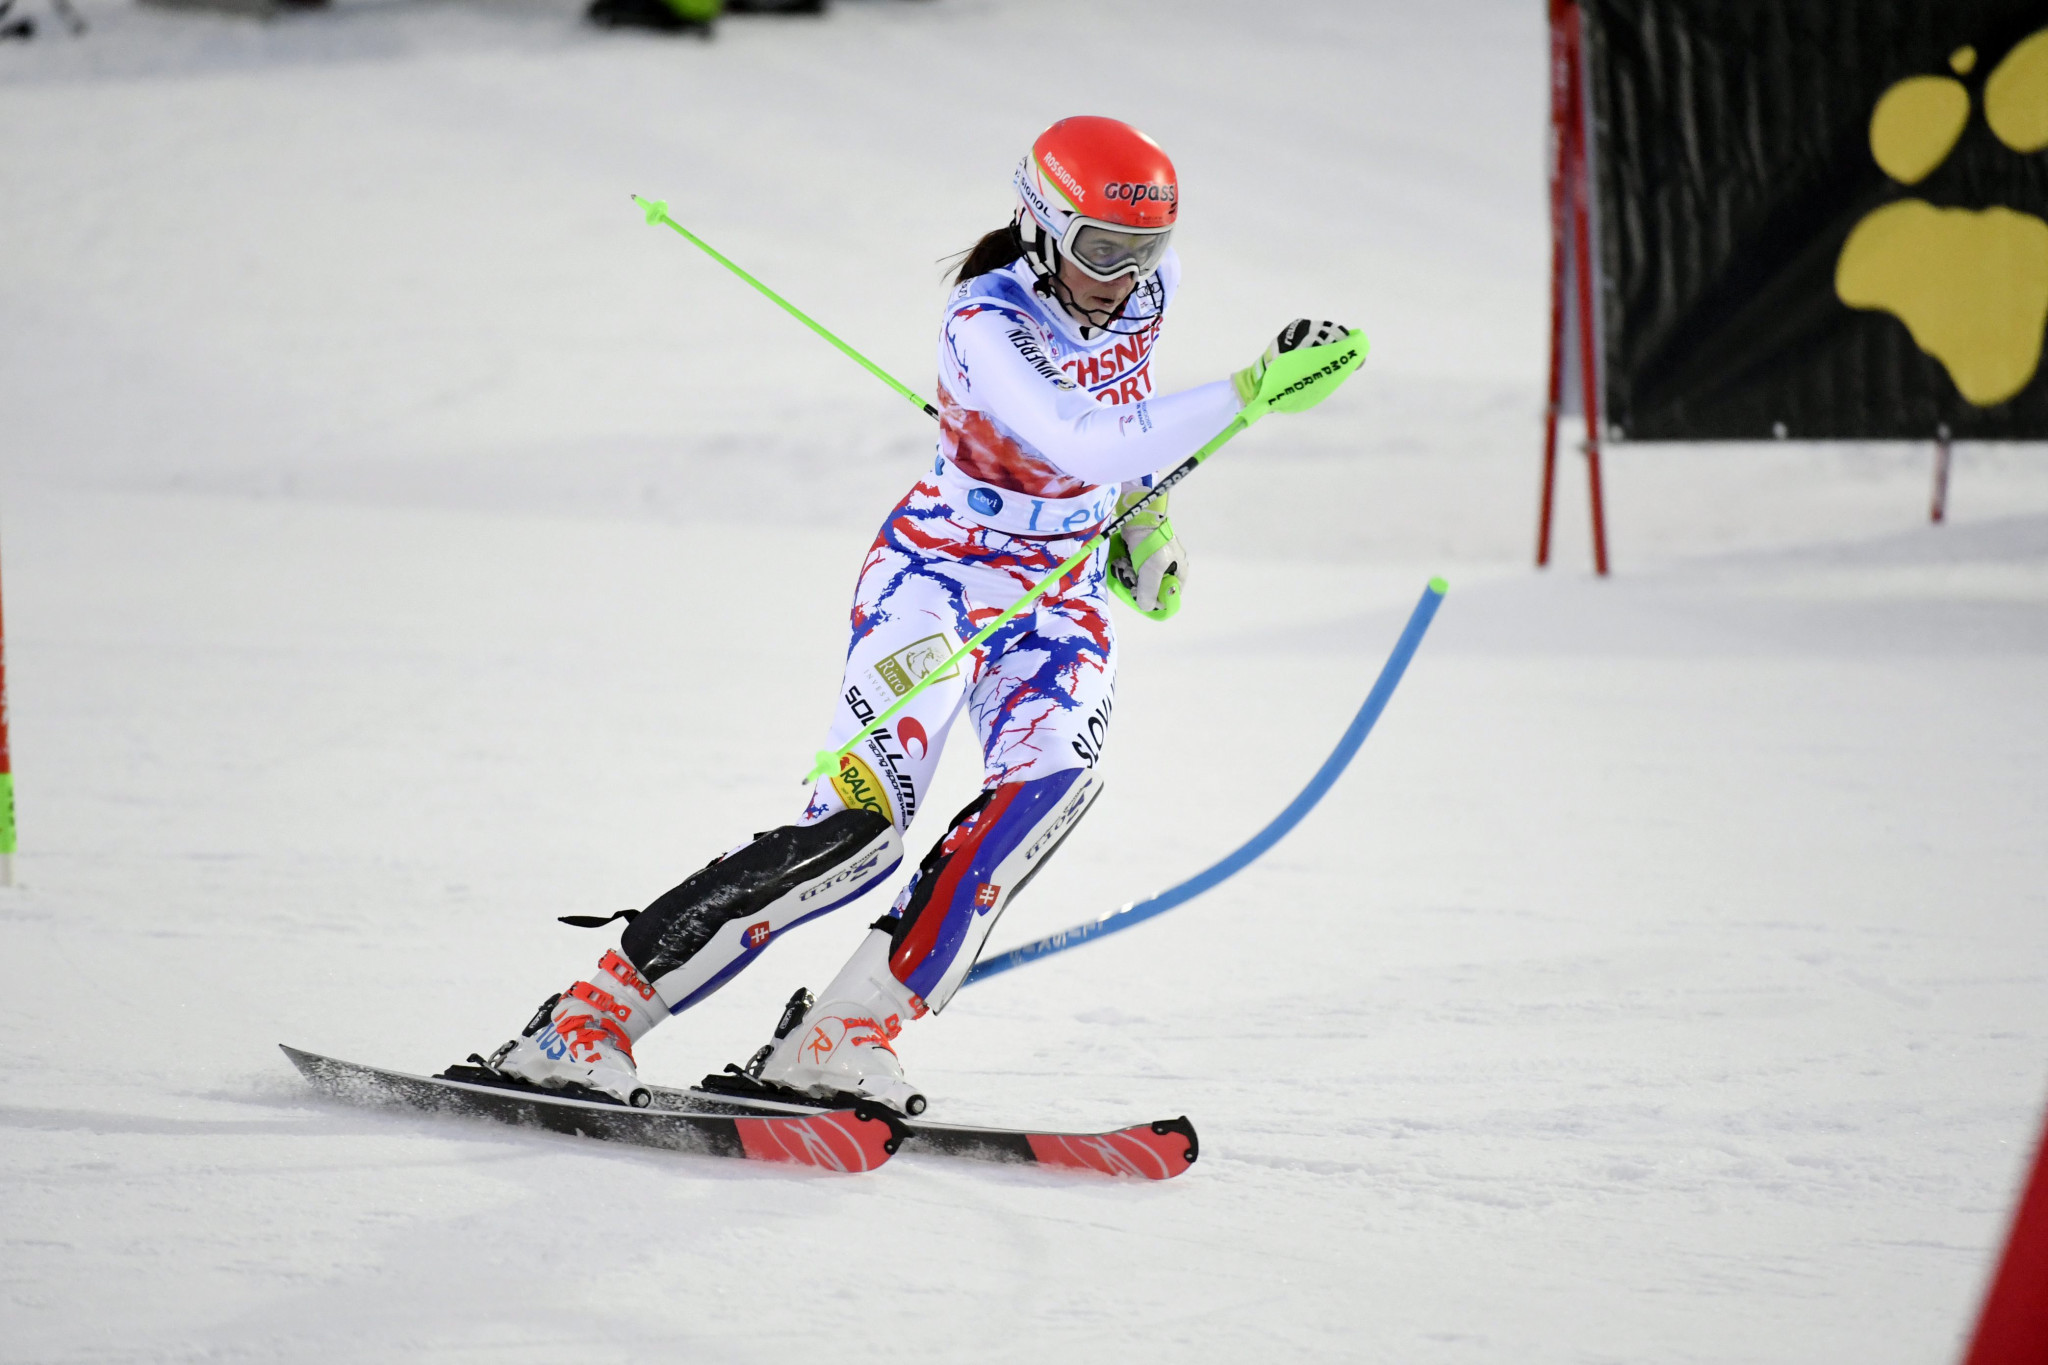 Petra Vlhova began her slalom season with victory in Levi today ©Getty Images